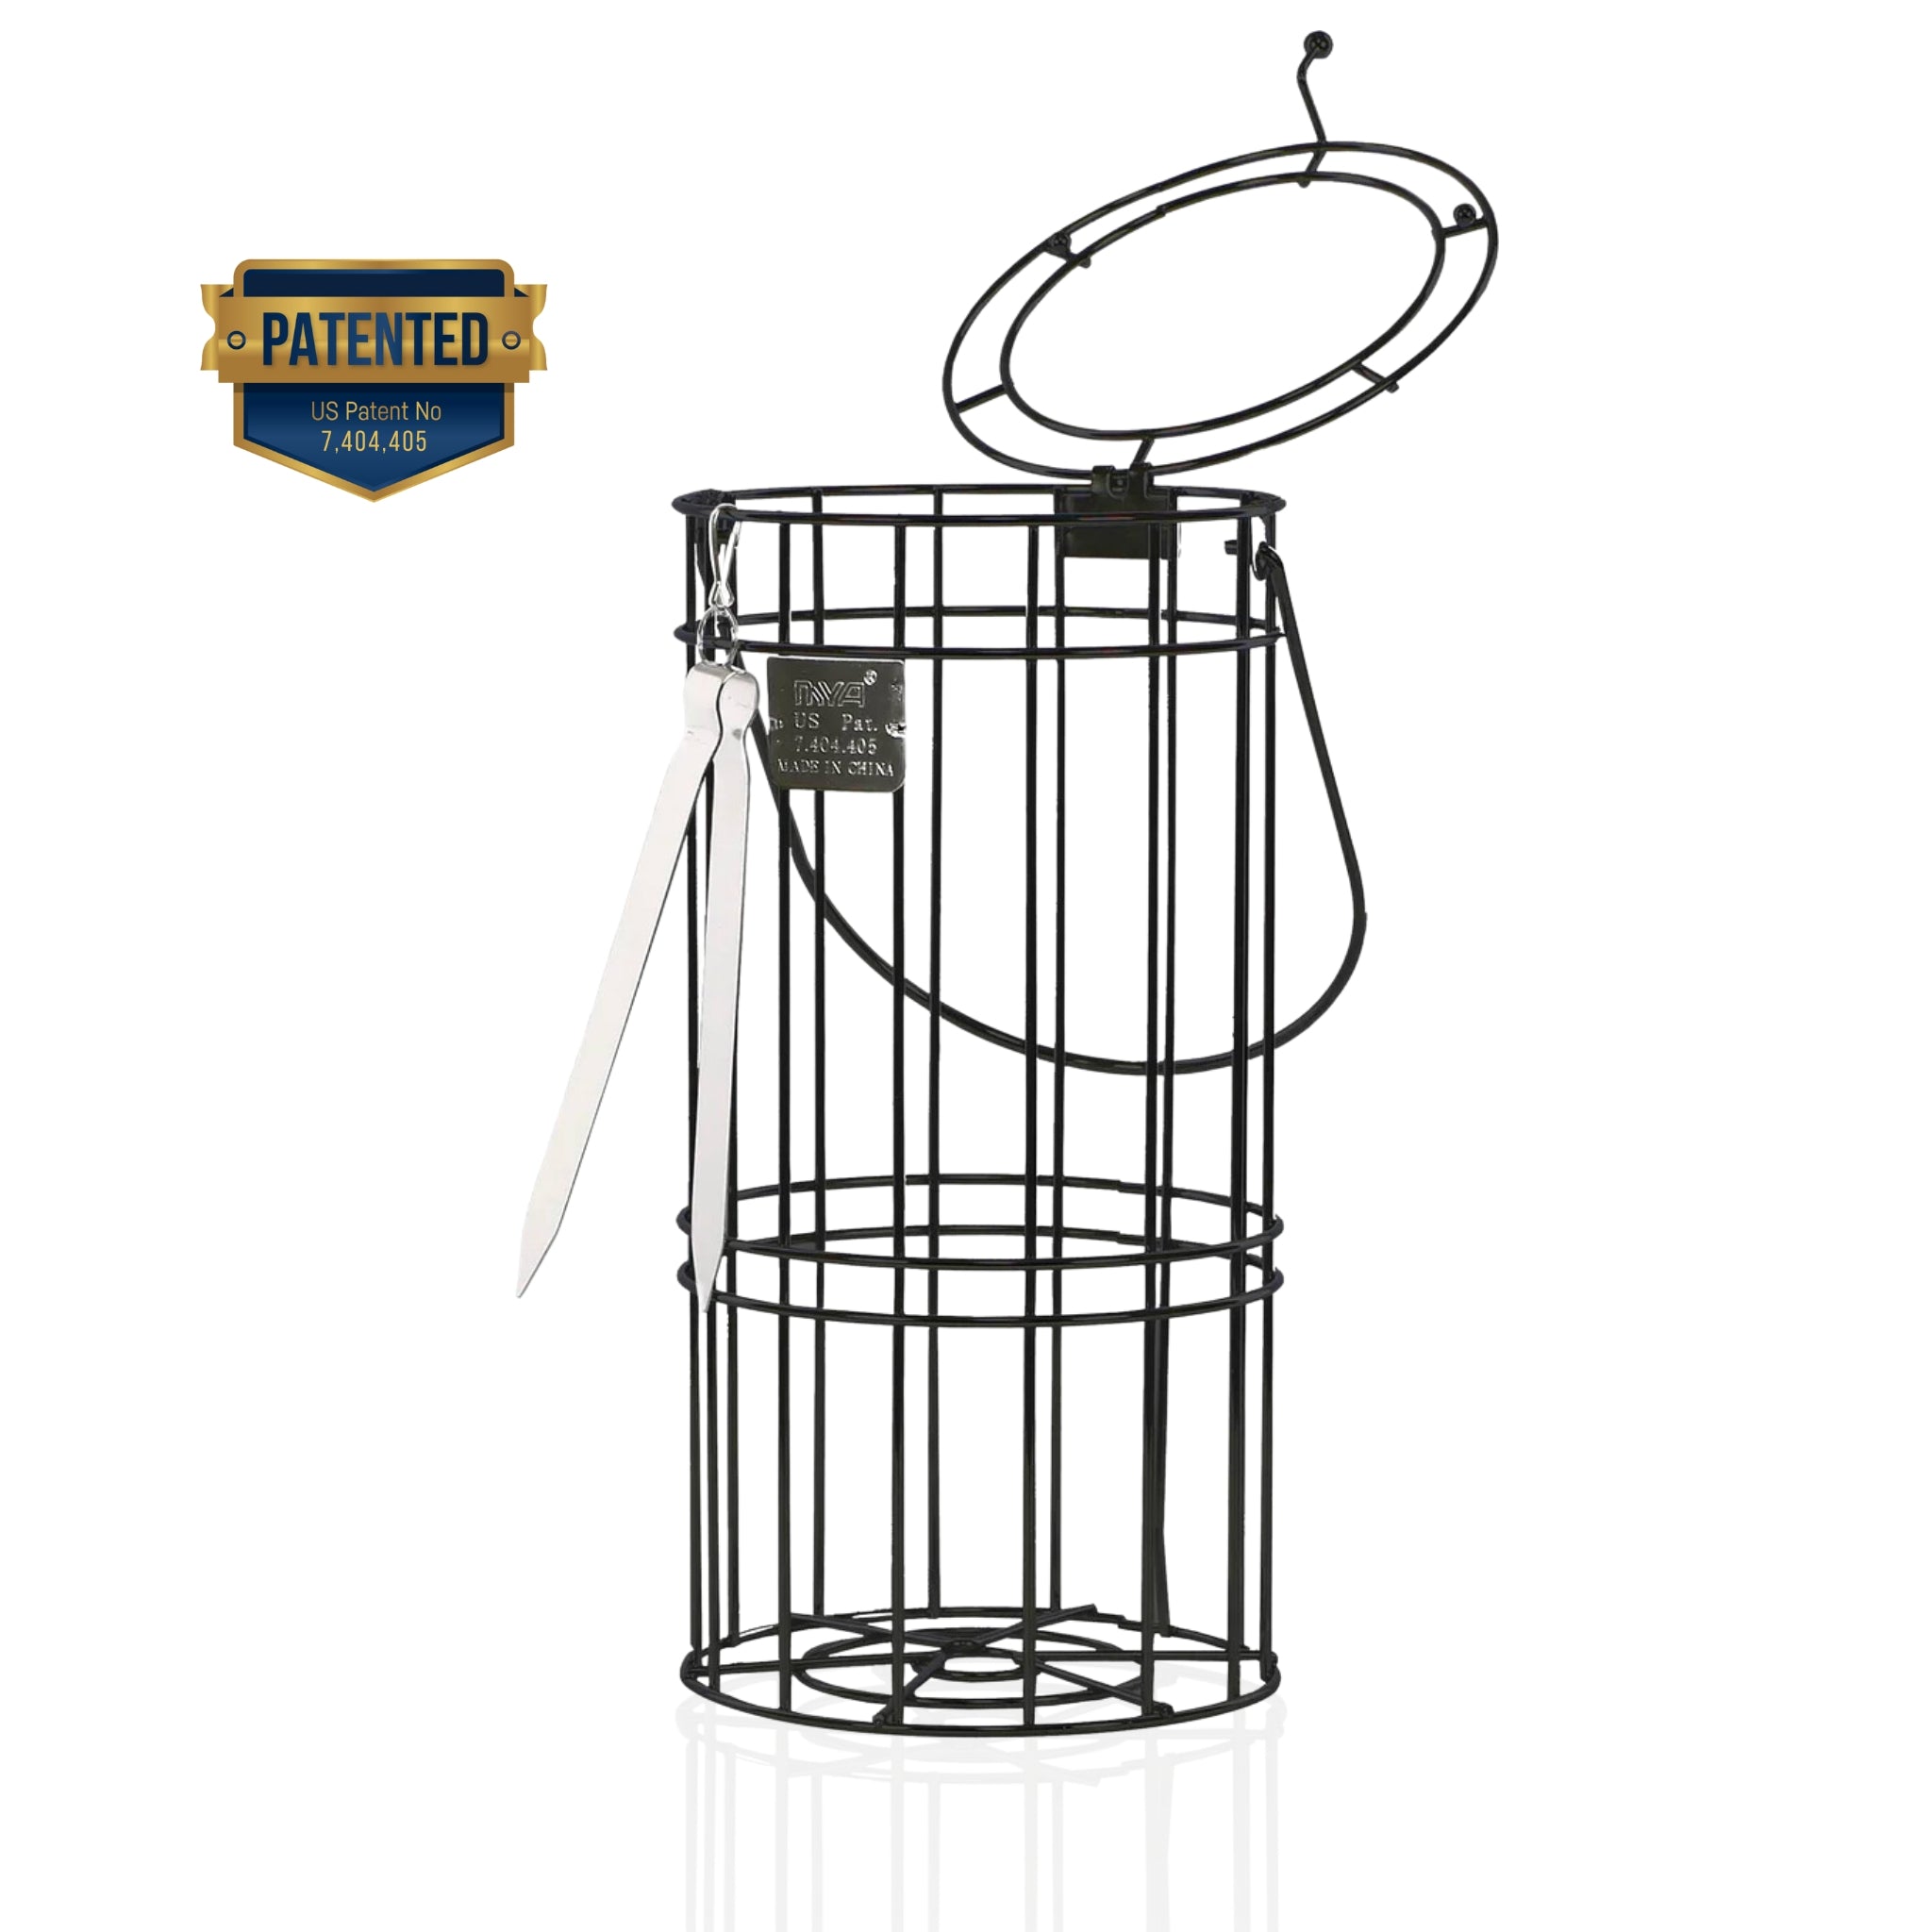 CHICO 251 Hookah Cage Patent